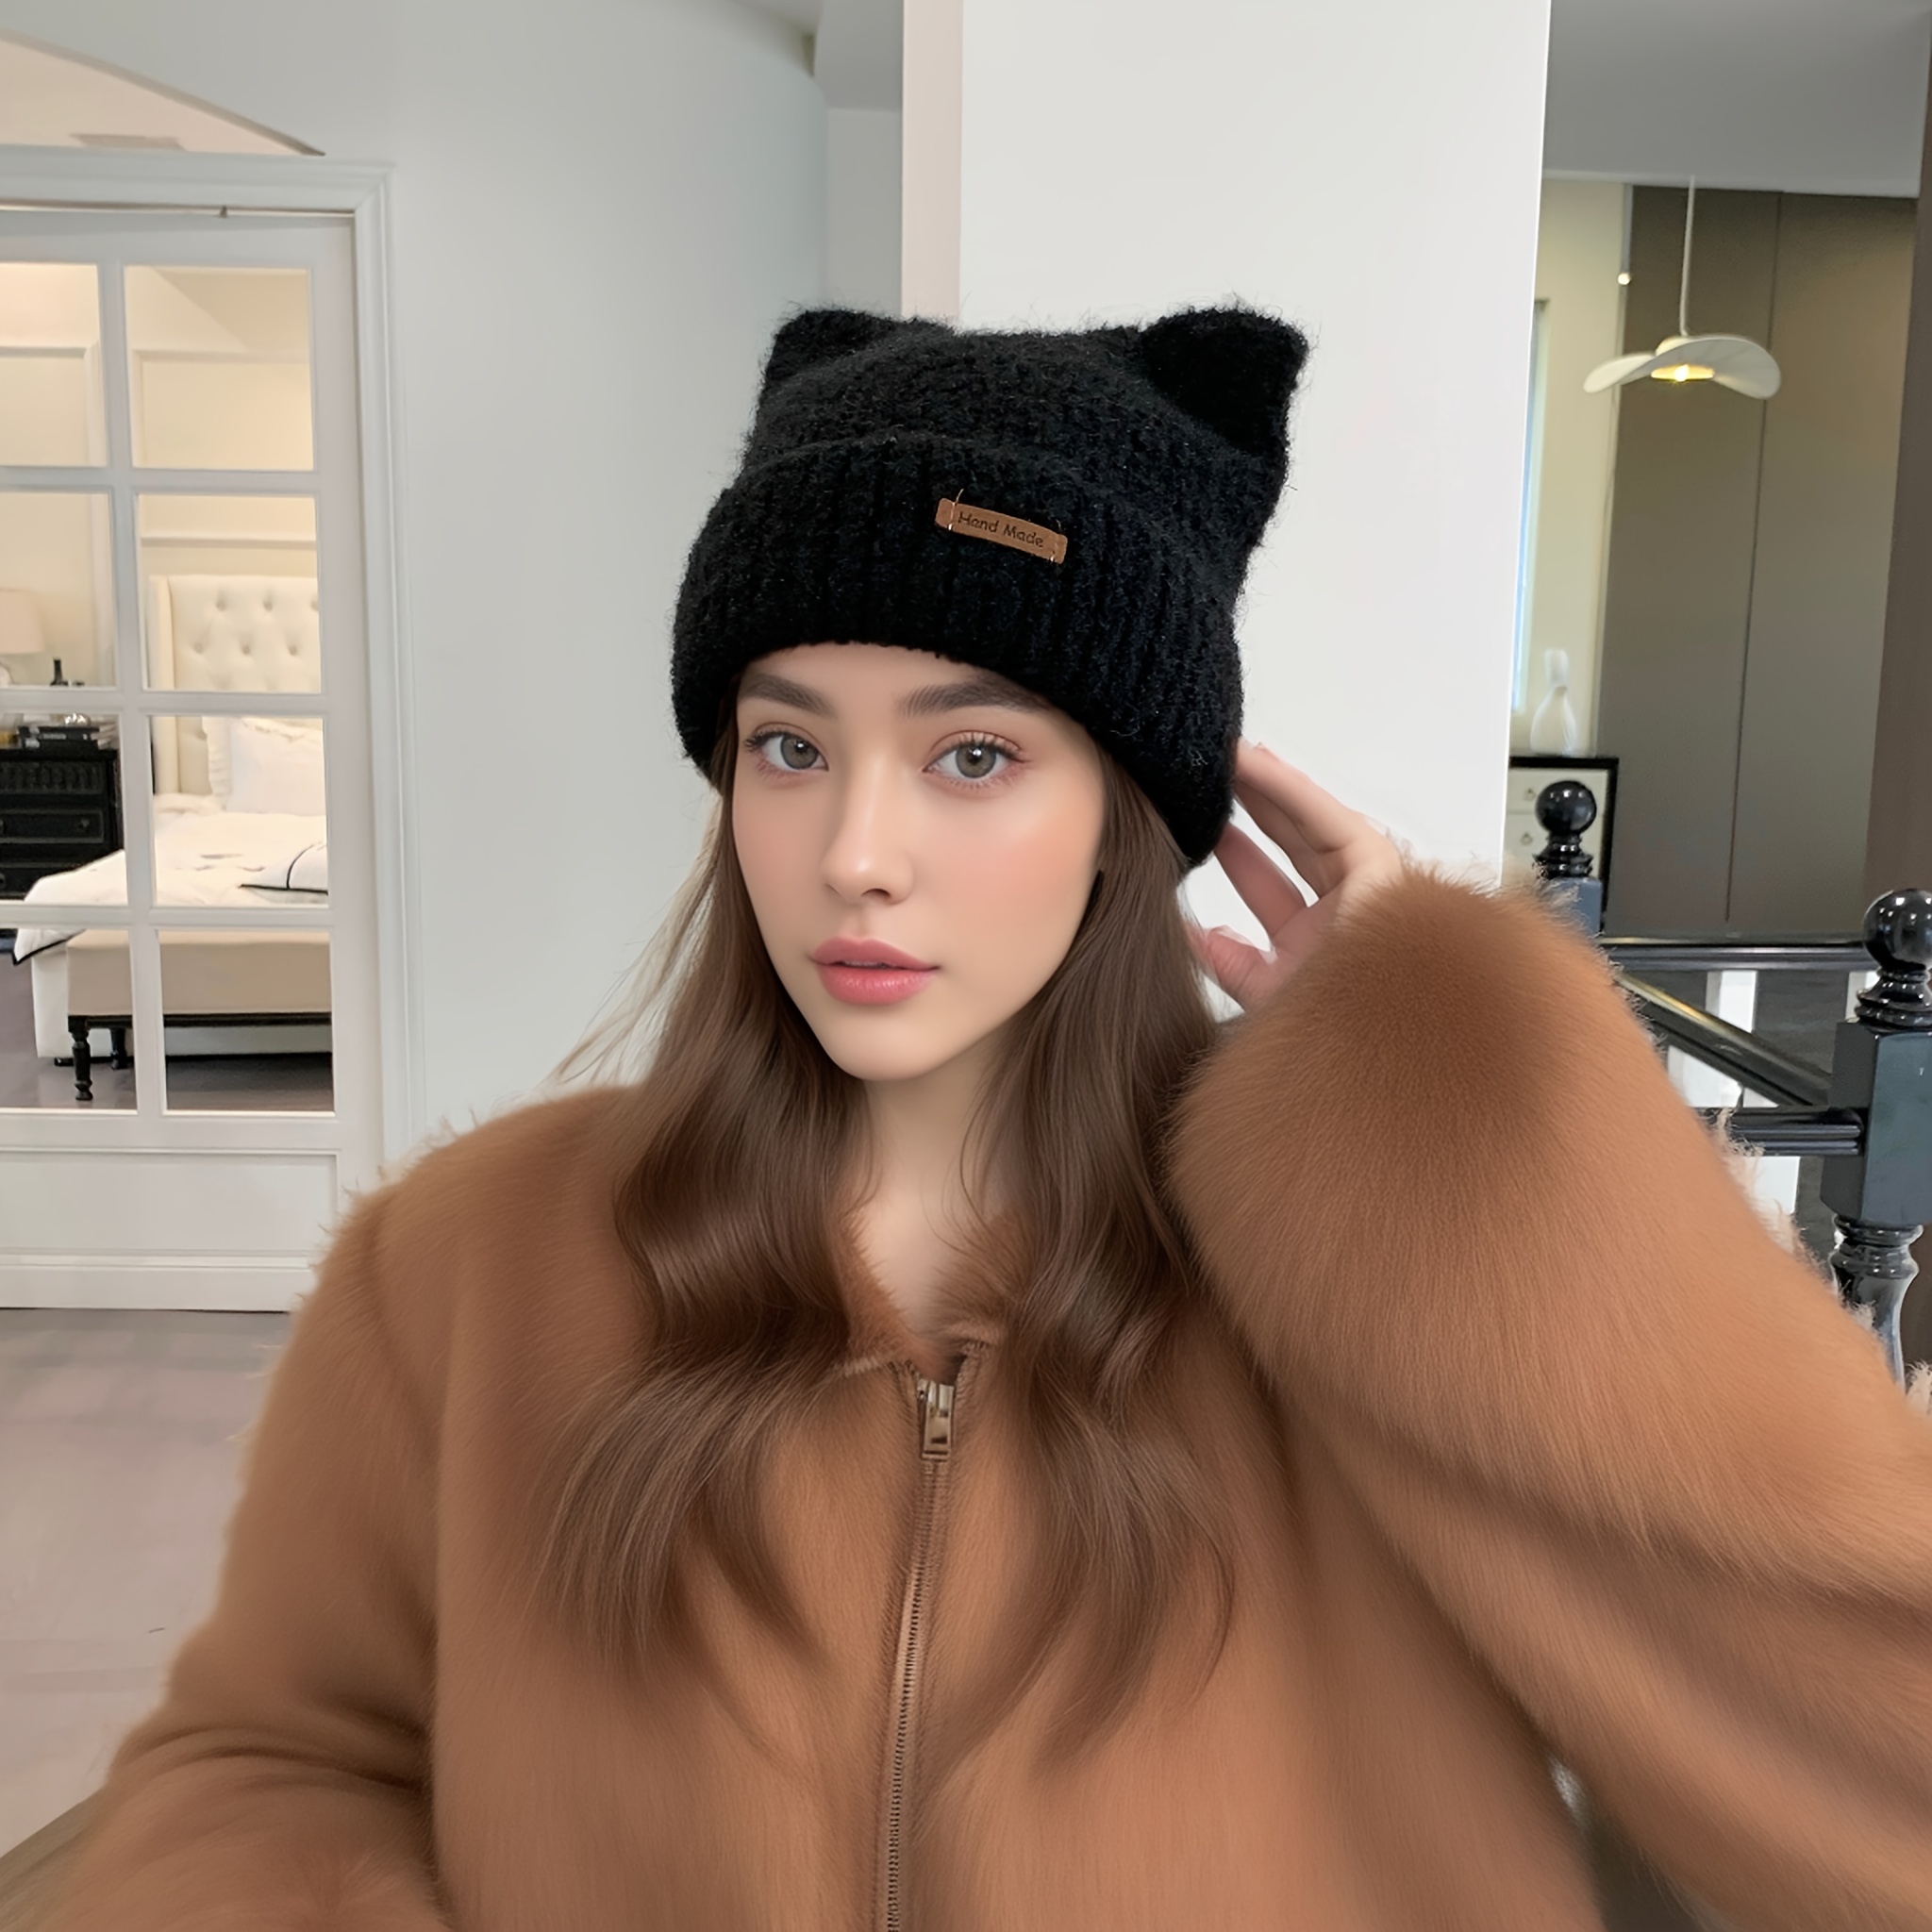 Designer Candy Colored Knitted Cat Beanie Bonnet For Women Warm